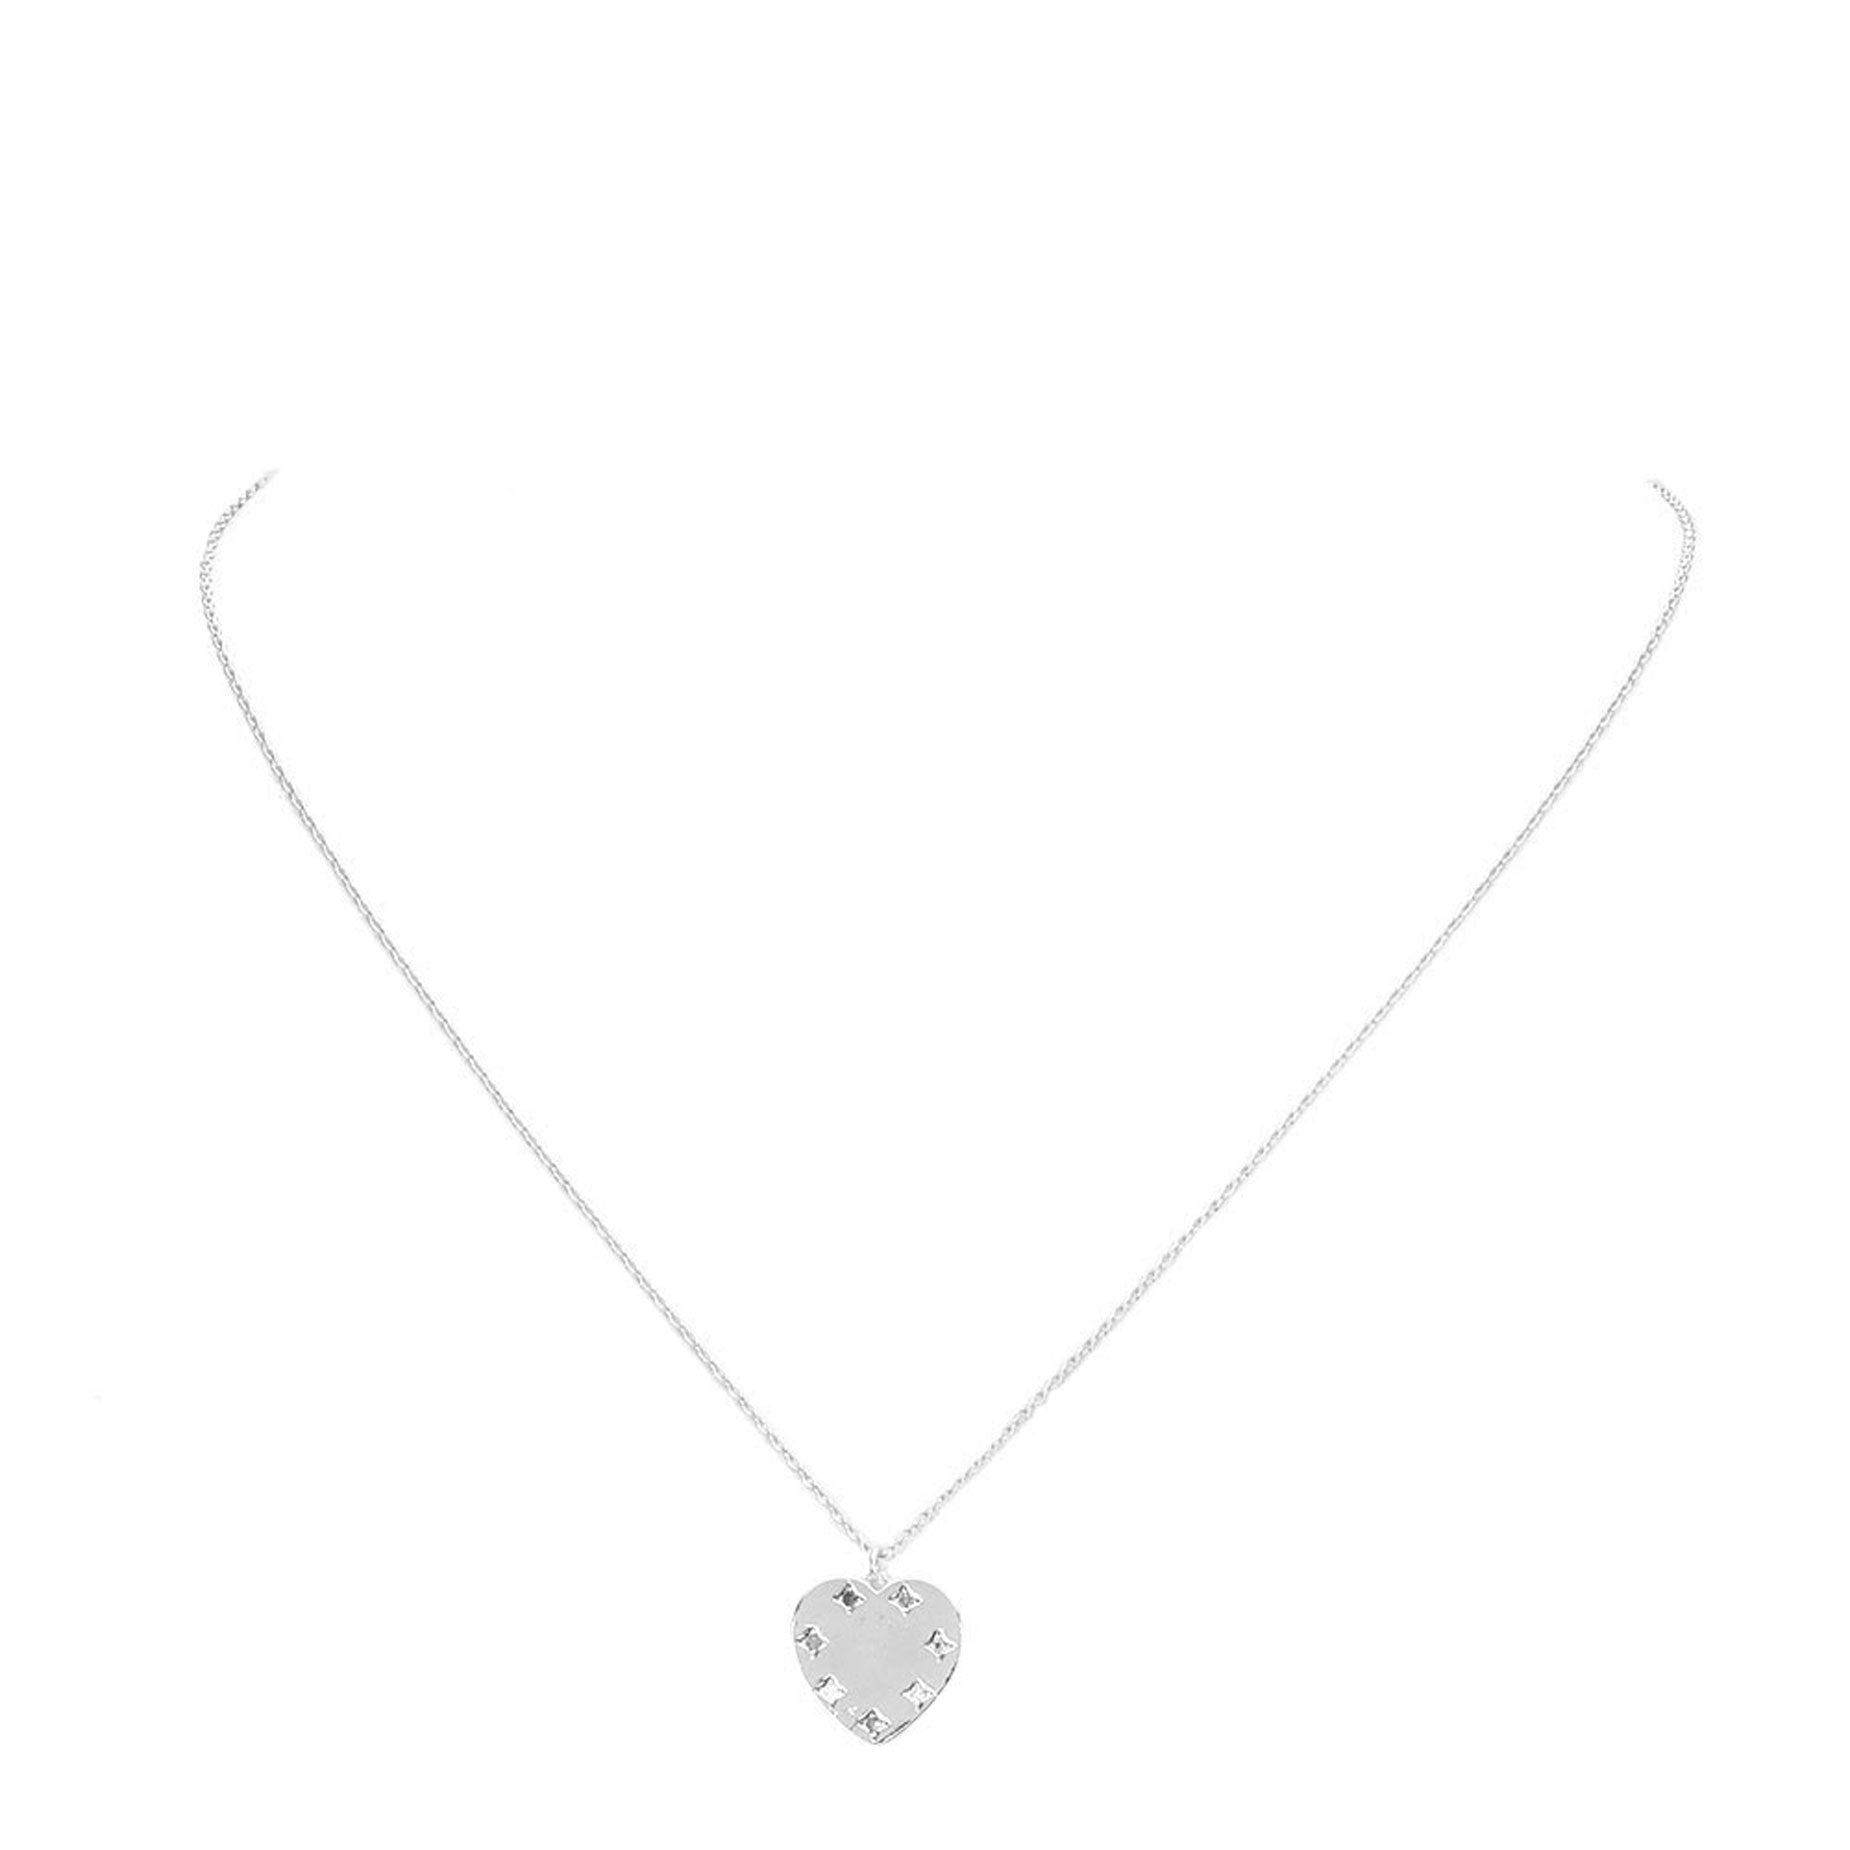 Rhodium Stone Embellished Brass Metal Heart Pendant Necklace, Get ready with these Pendant Necklace, put on a pop of color to complete your ensemble. Perfect for adding just the right amount of shimmer & shine and a touch of class to special events. Perfect Birthday Gift, Anniversary Gift, Mother's Day Gift, Valentine's Day Gift.